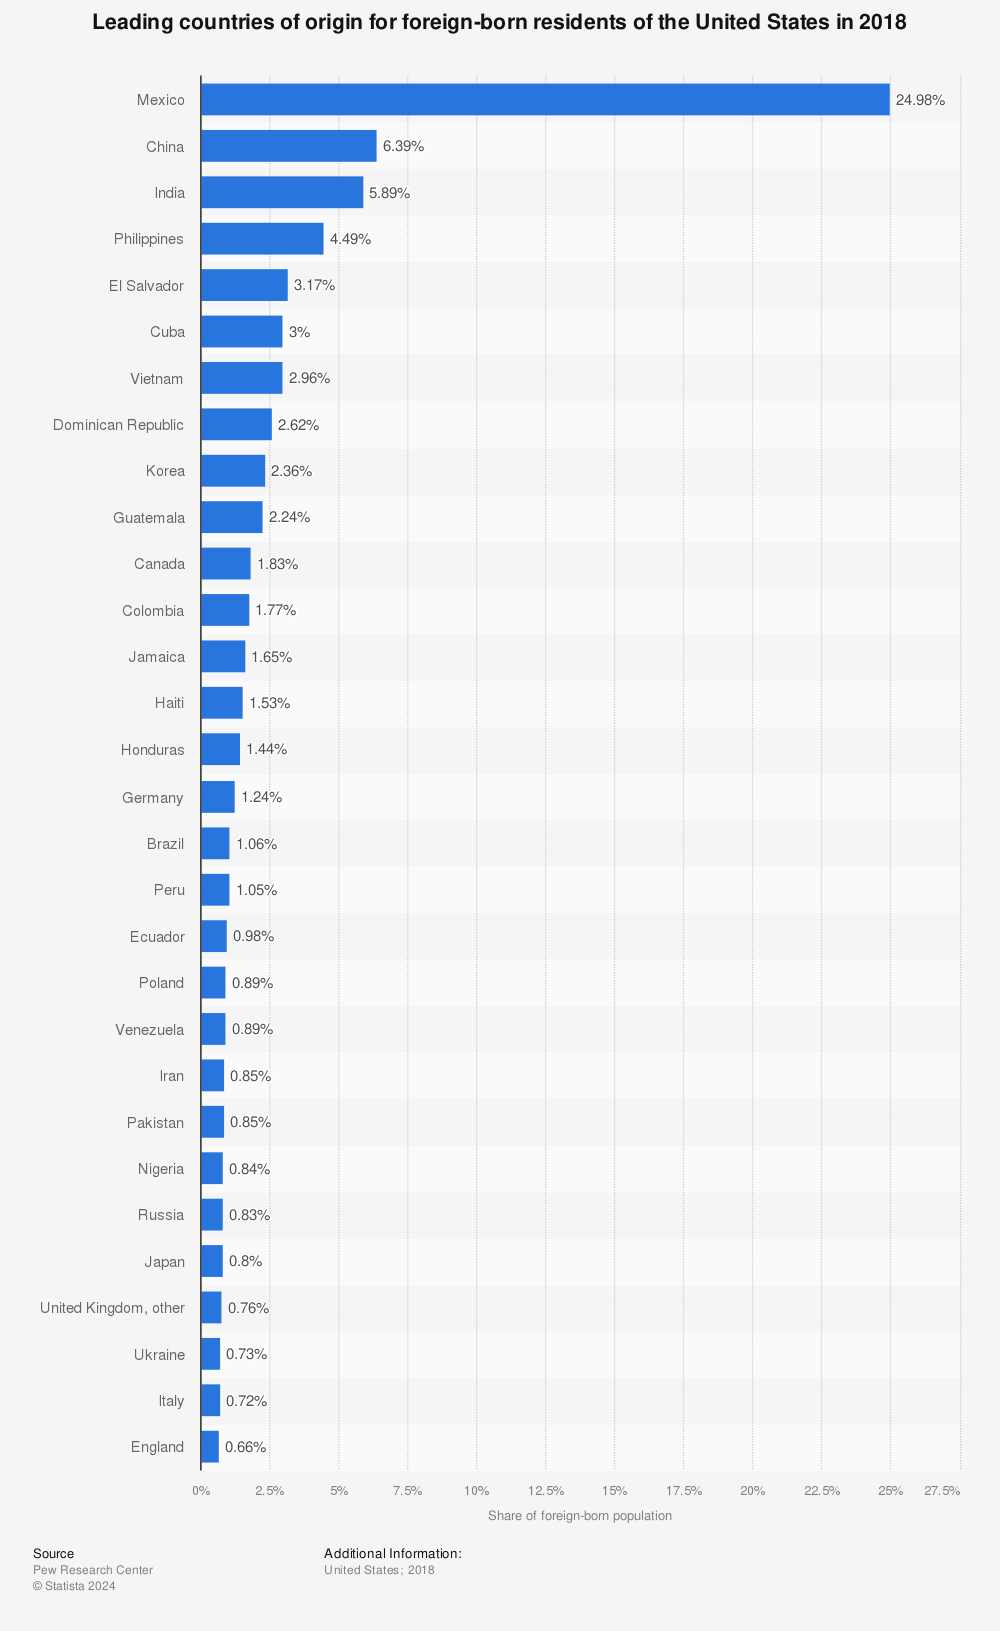 Statistic: Leading countries of origin for foreign-born residents of the United States in 2018 | Statista